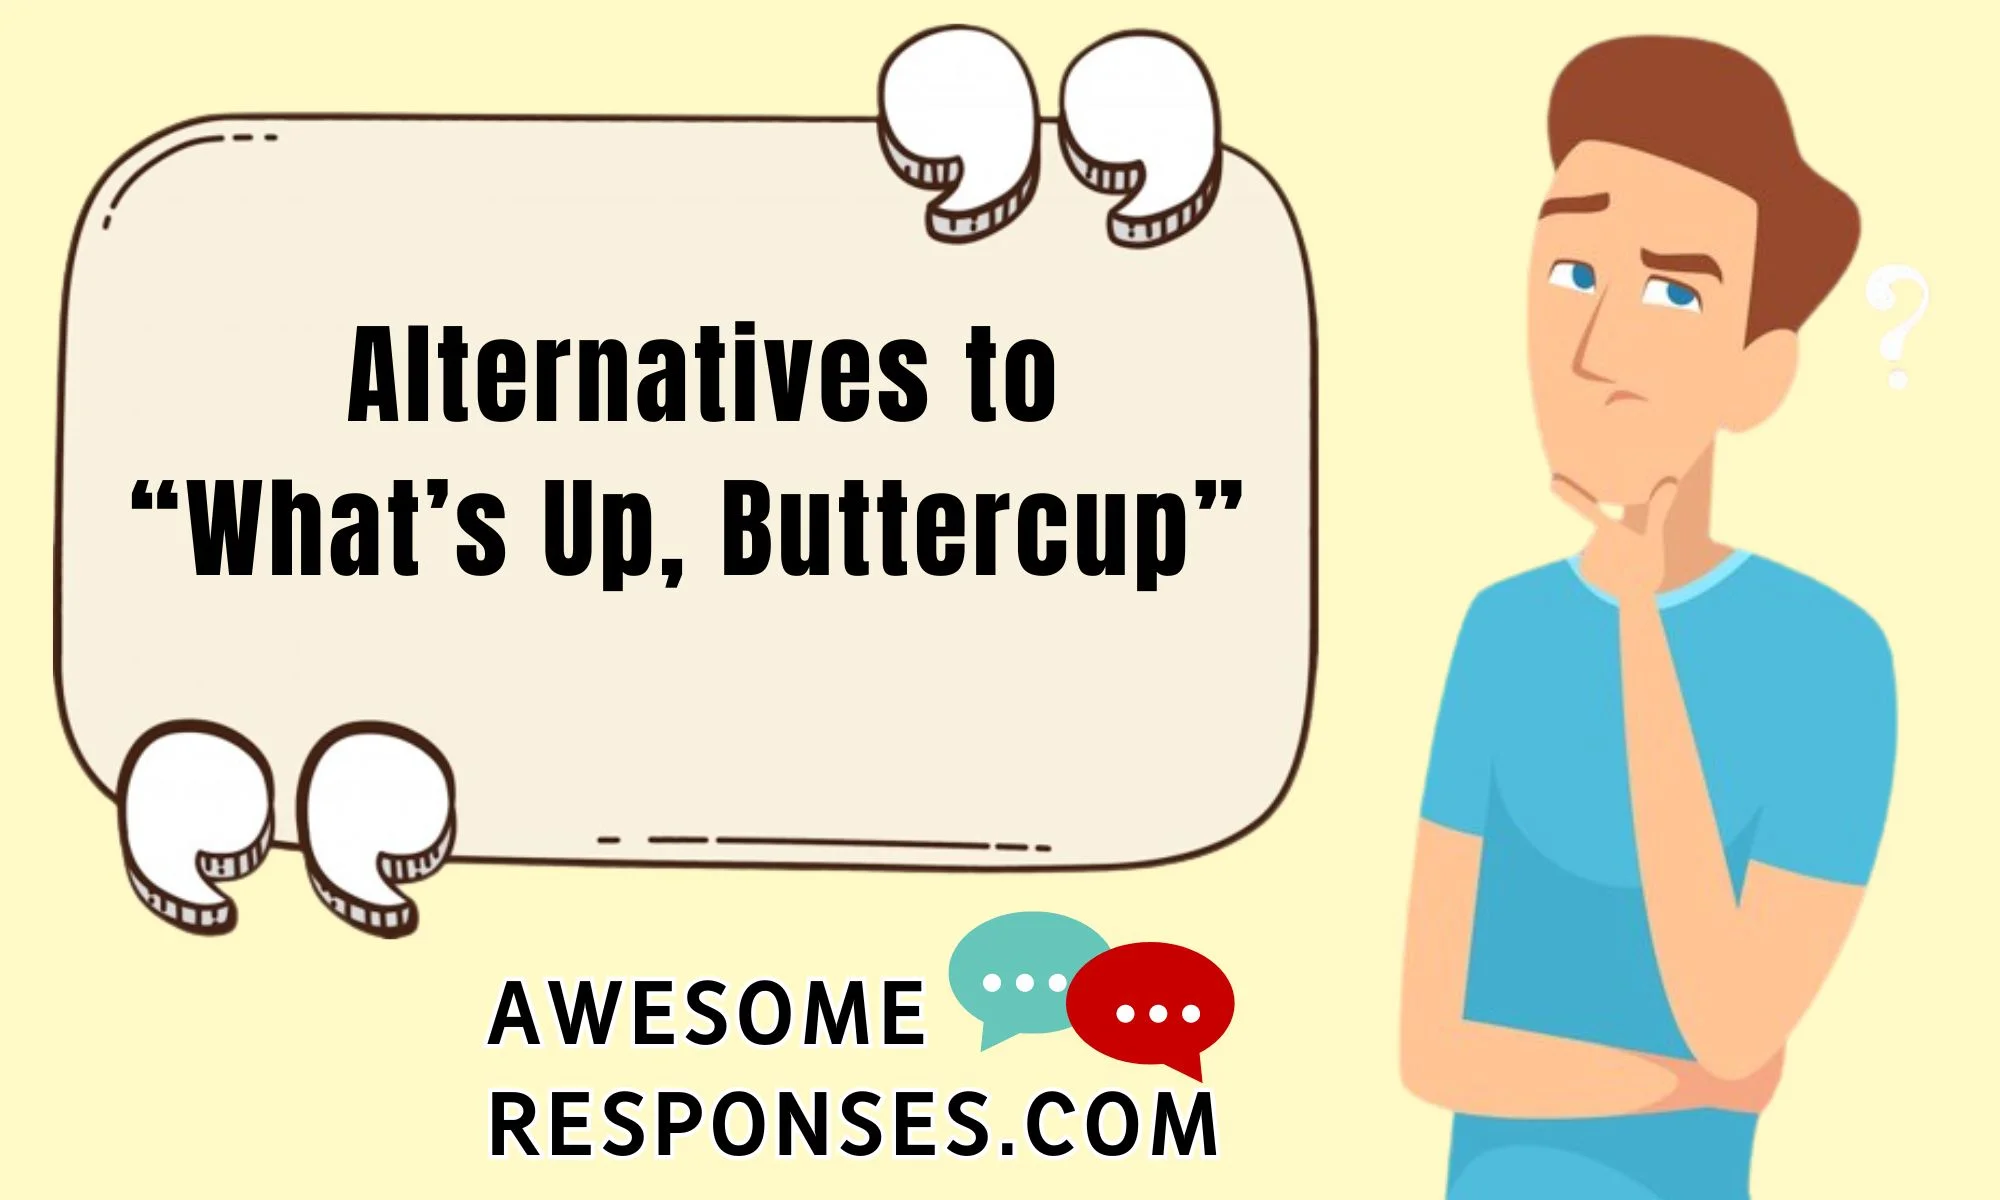 Alternatives to “What’s Up, Buttercup”